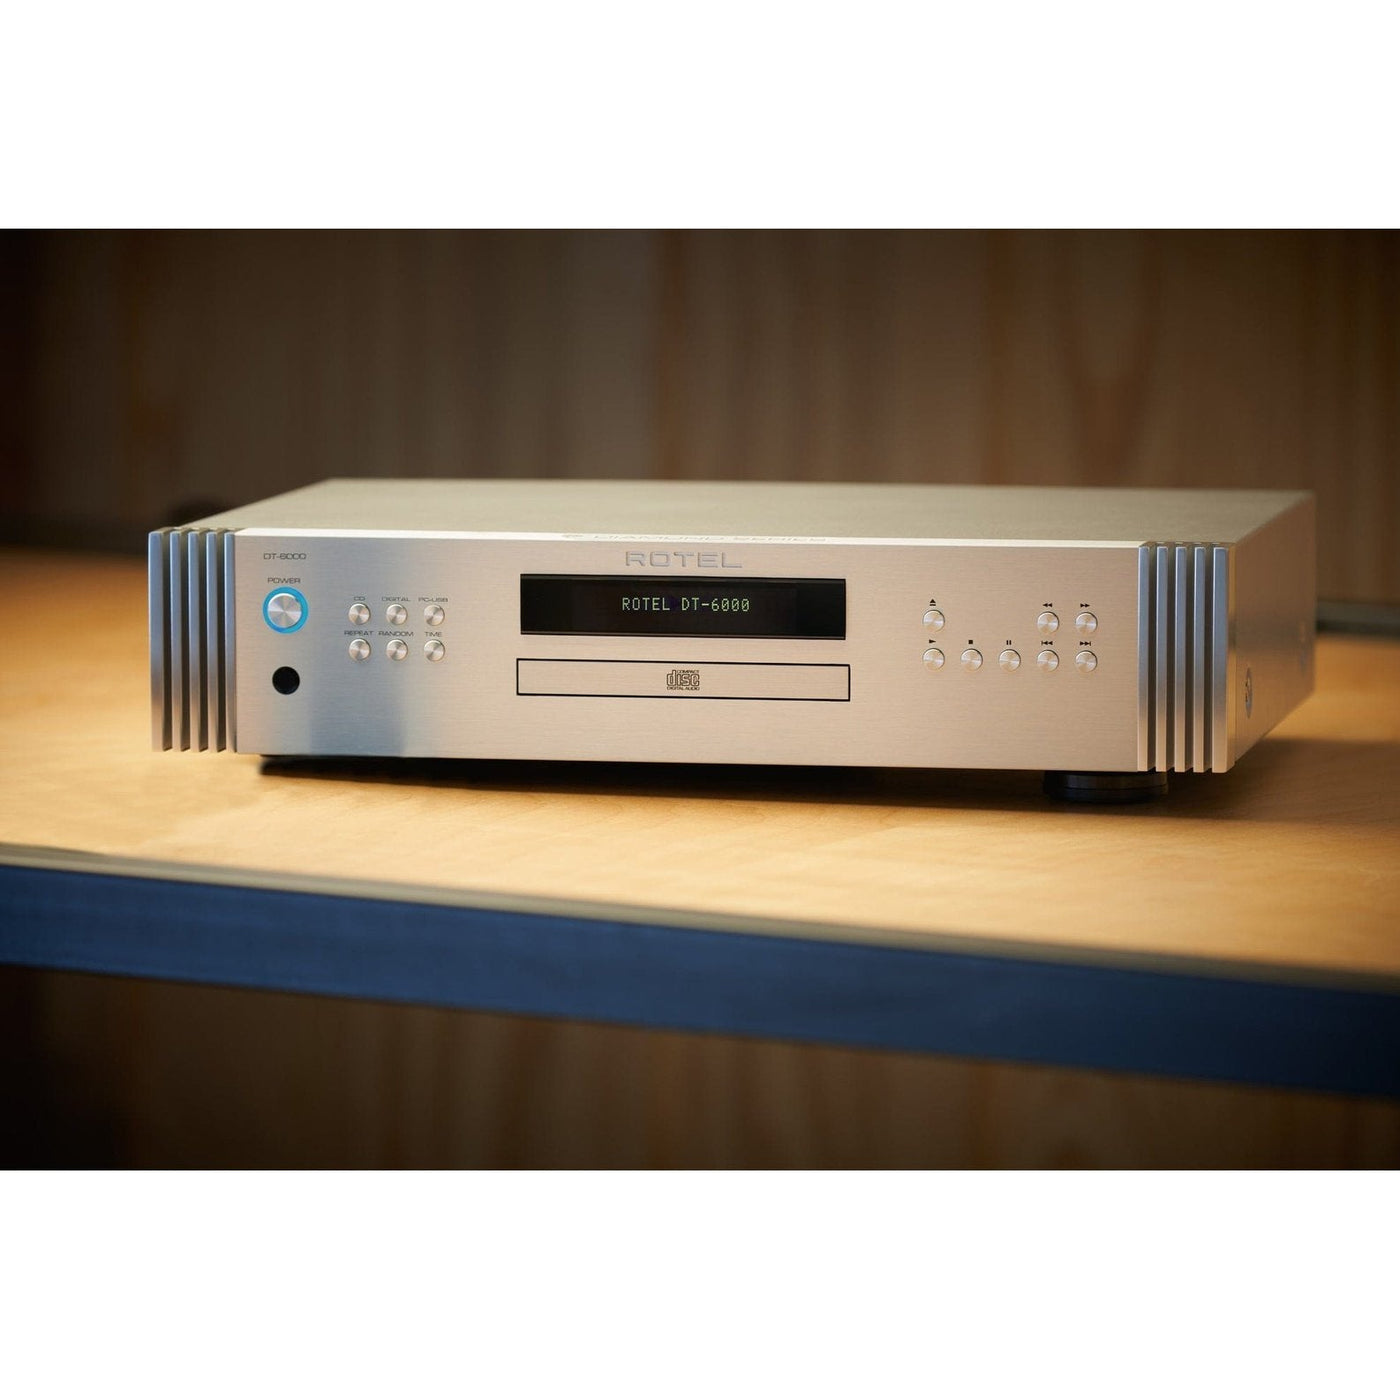 Rotel Rotel Diamond Series DT-6000 CD Player DAC Transport CD Players